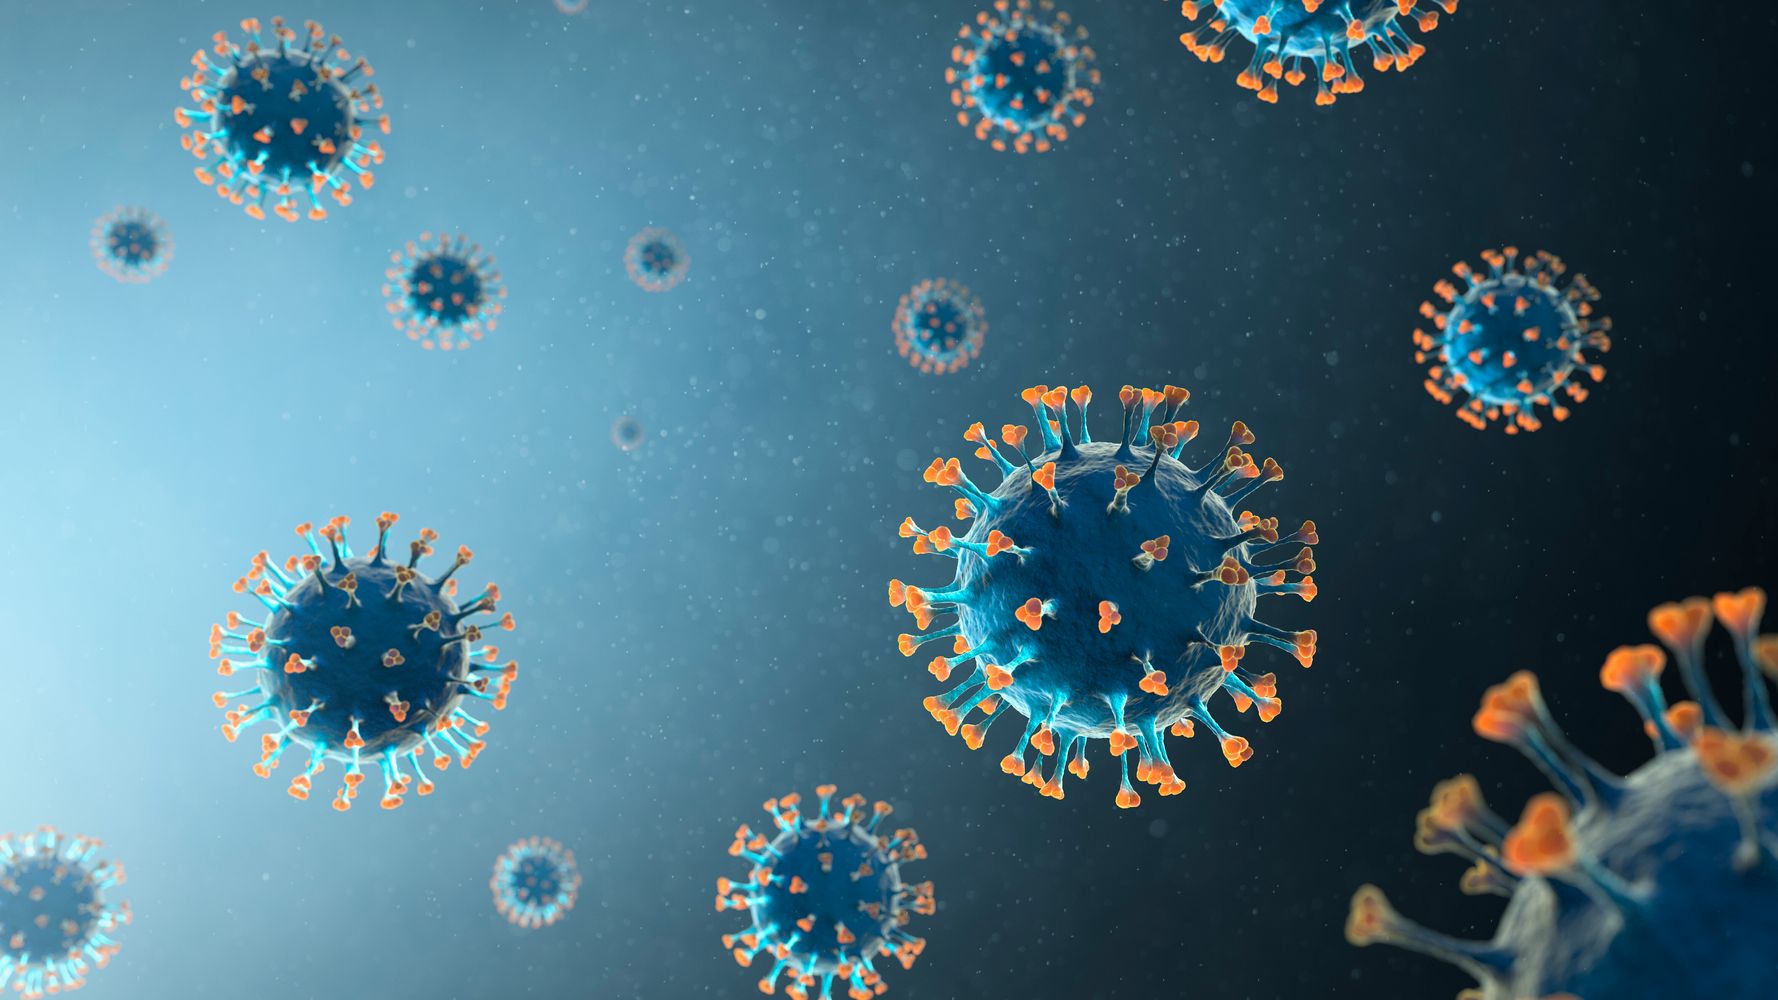 Antibody Response To Coronavirus Could Decline Over Time, Study Shows